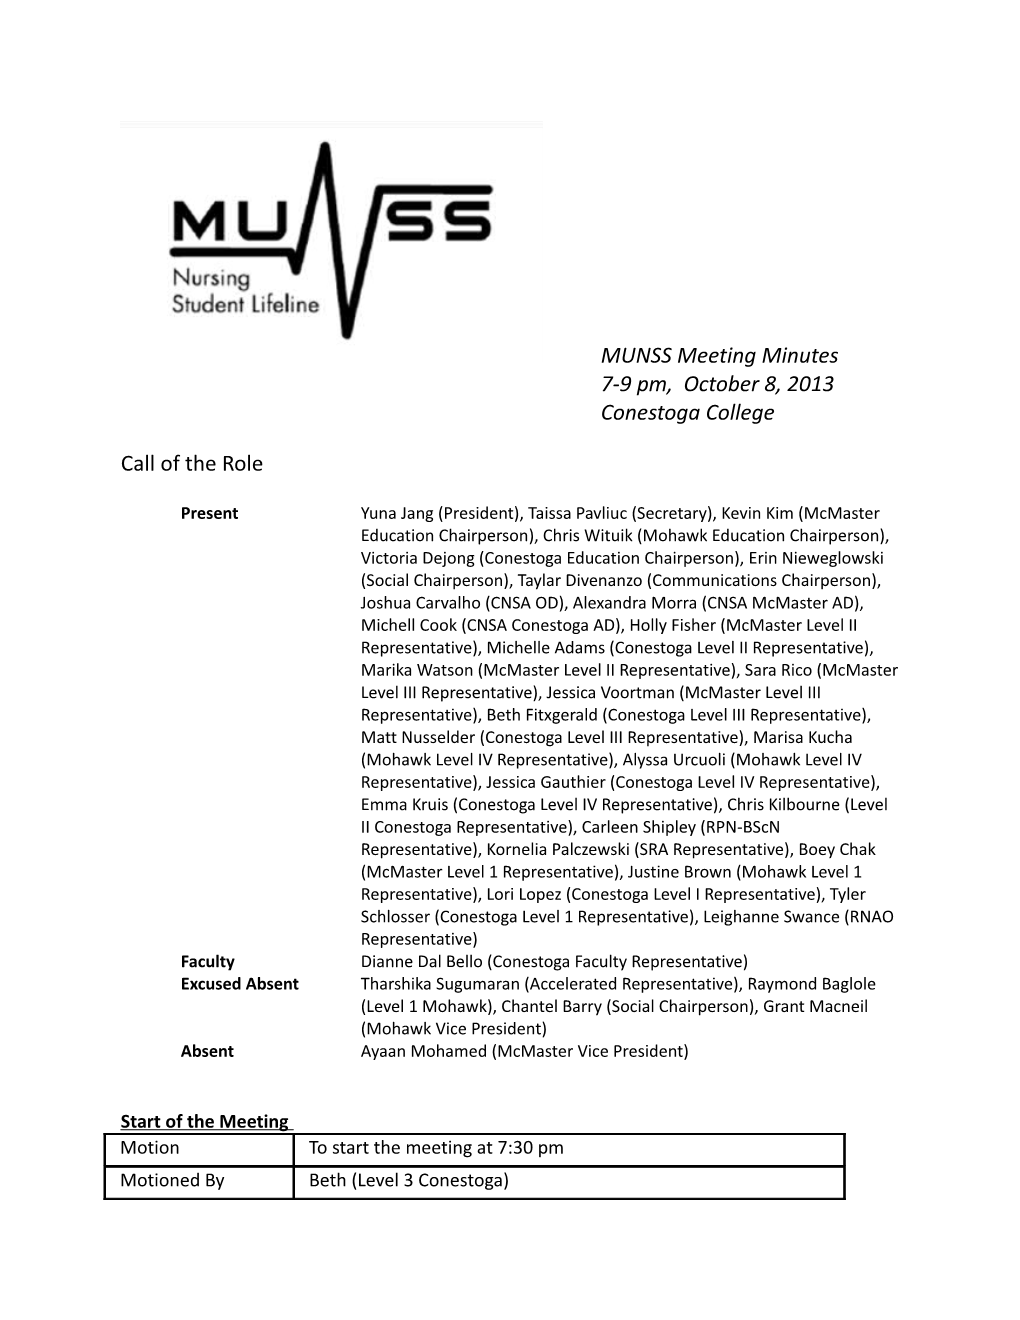 MUNSS Meeting Minutes